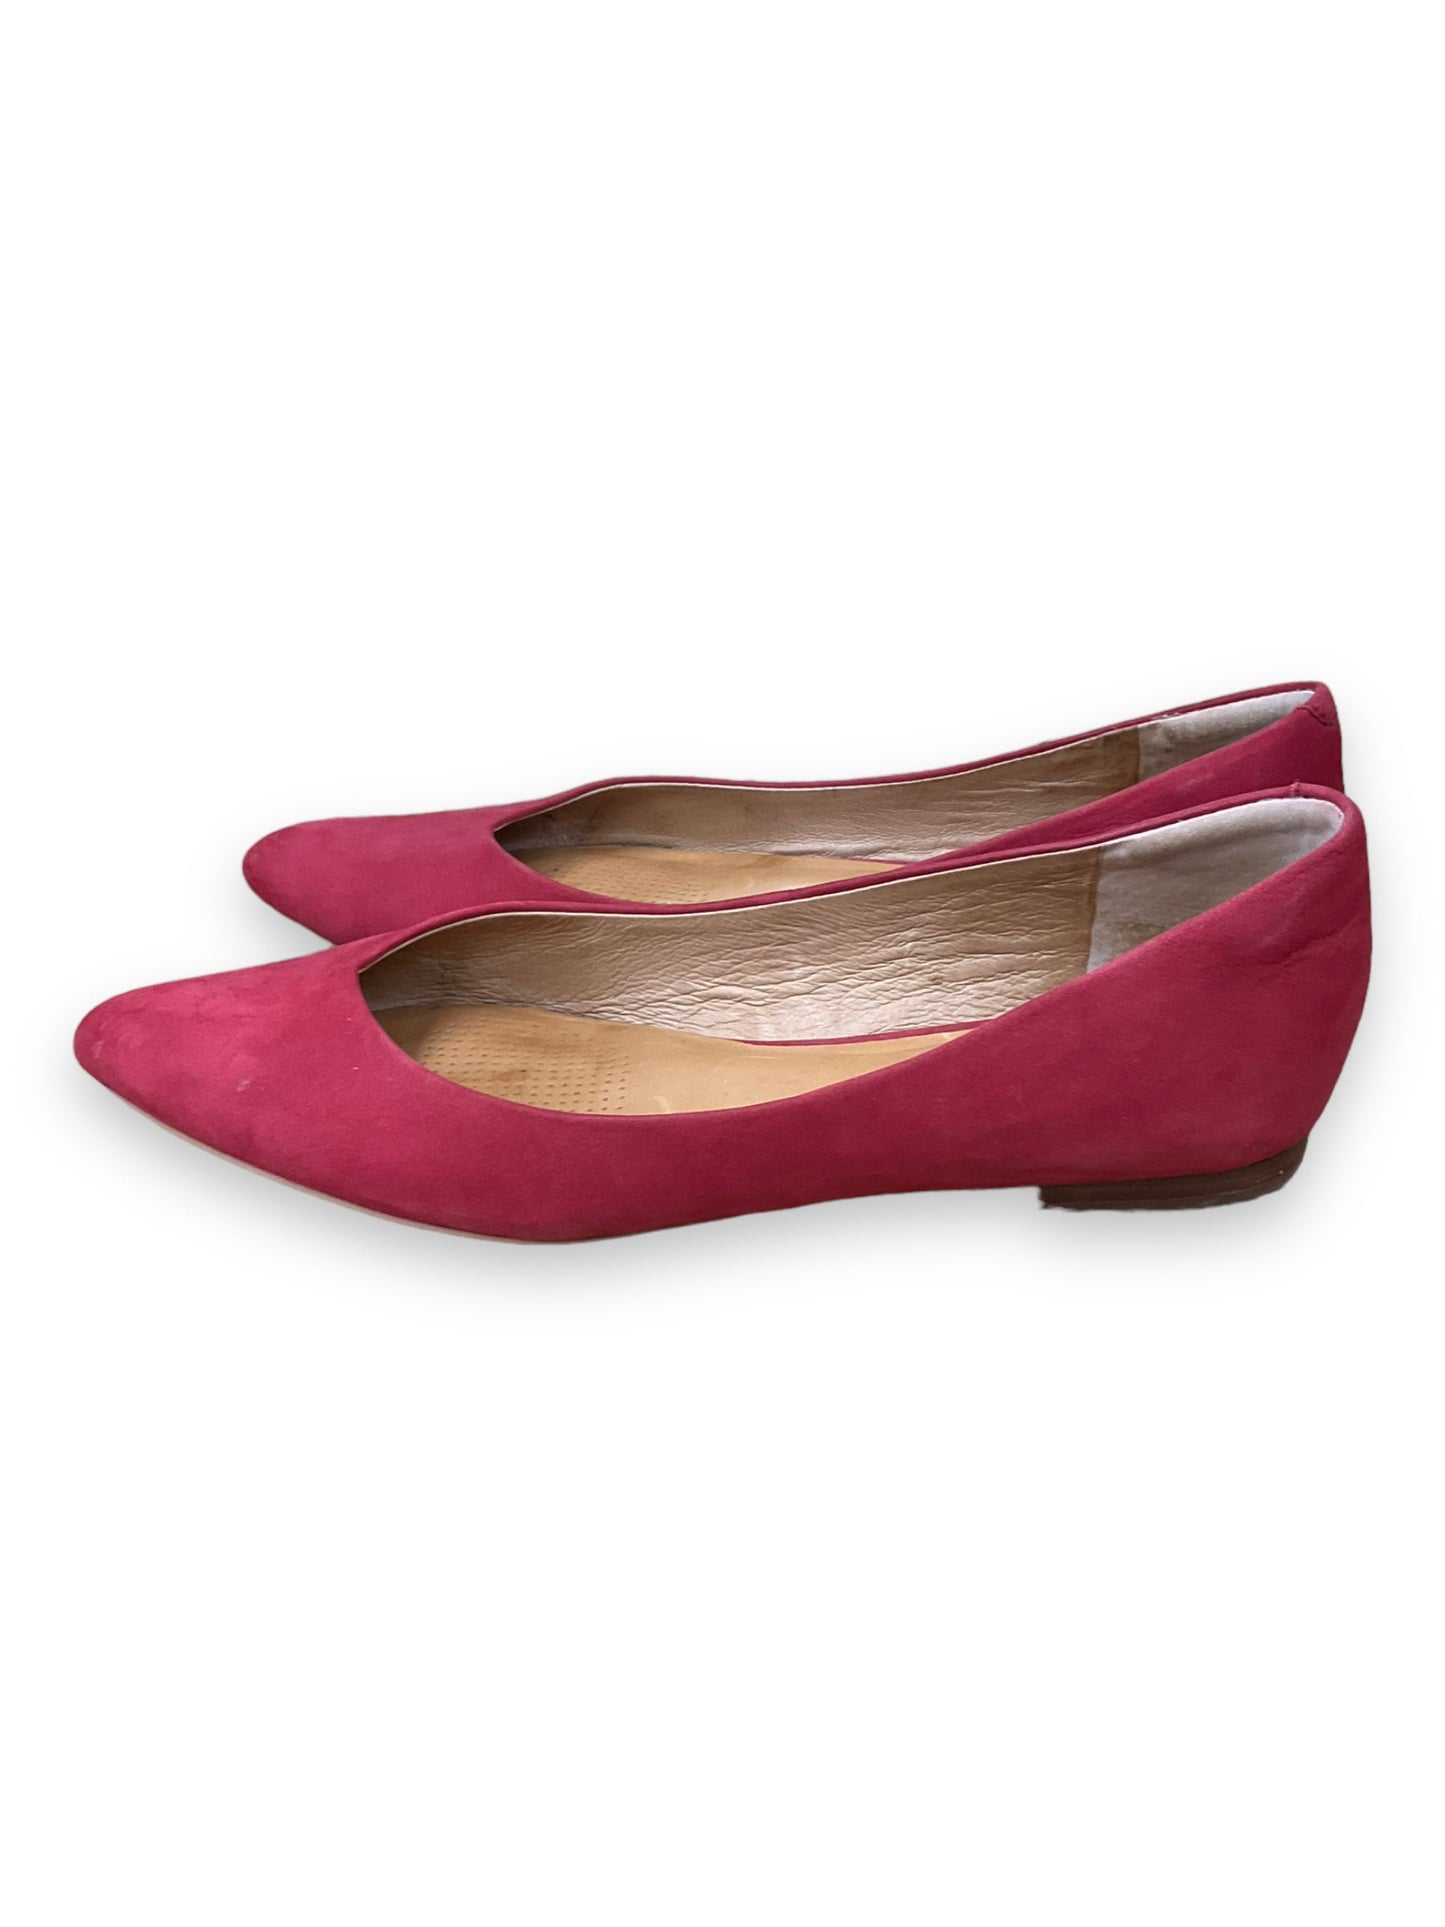 Shoes Flats Ballet By Corso Cosmo  Size: 8